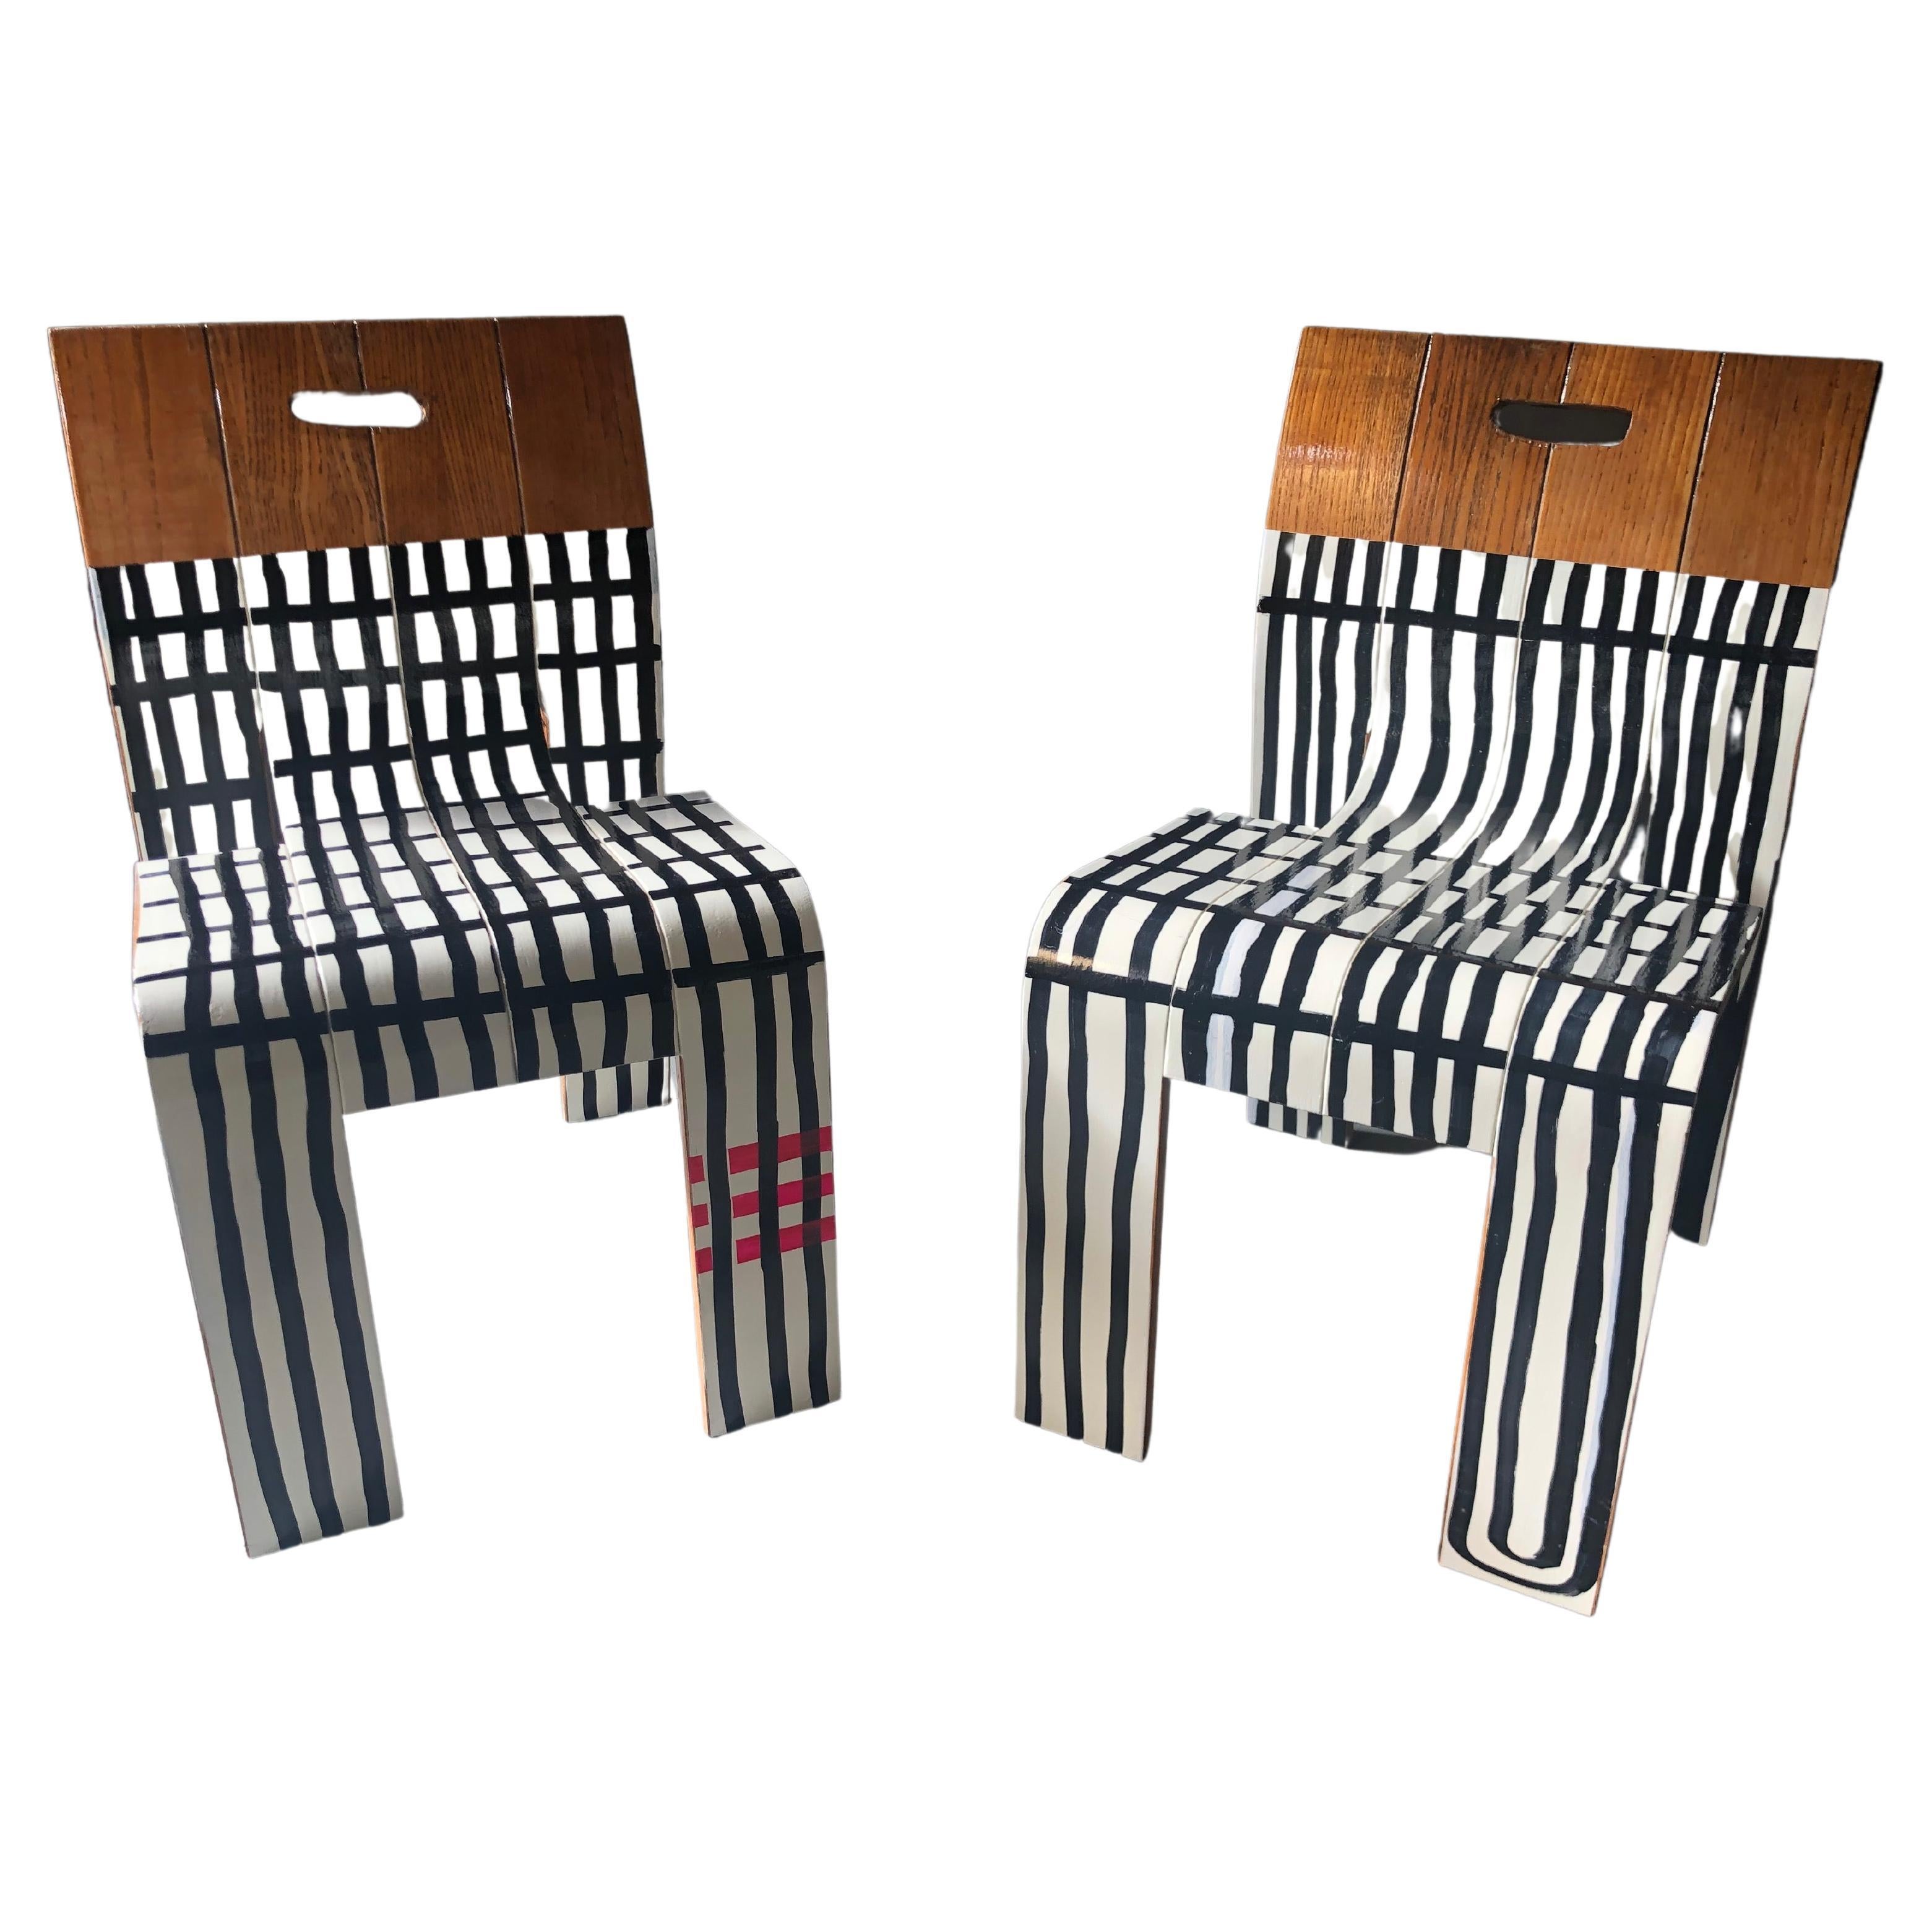 Two Strip Chairs Contemporised by Markus Friedrich Staab For Sale